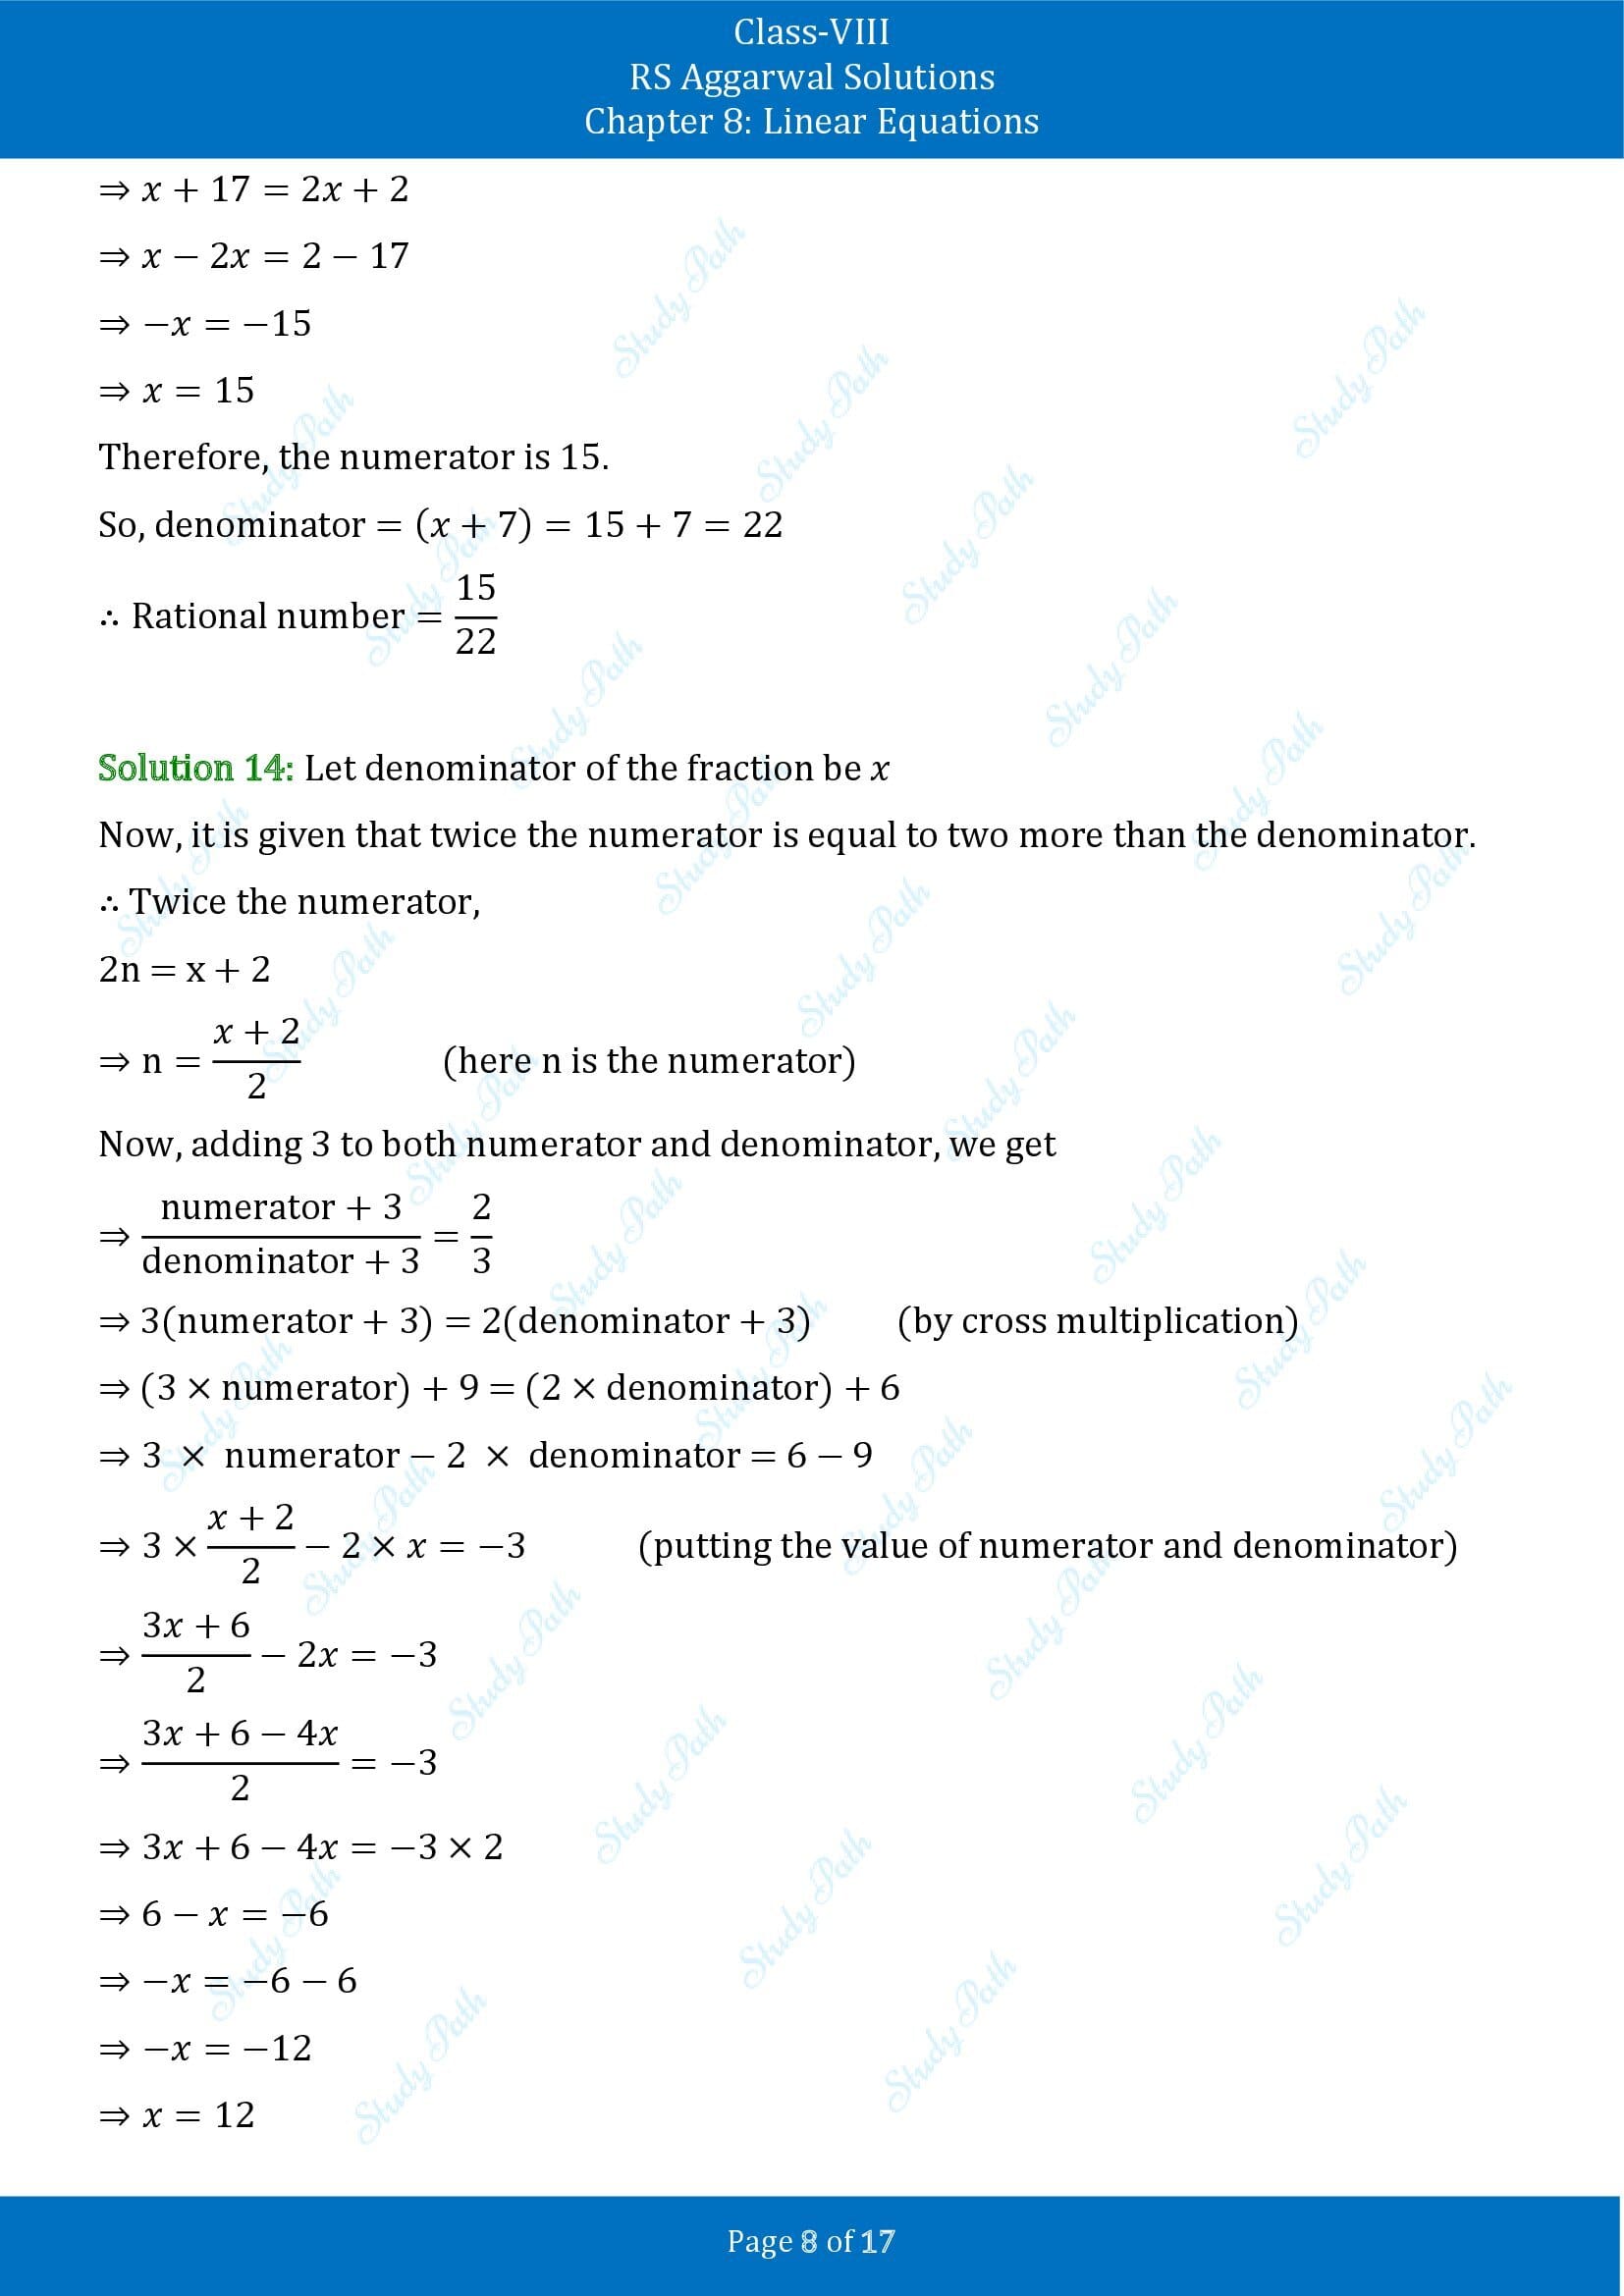 RS Aggarwal Solutions Class 8 Chapter 8 Linear Equations Exercise 8B 00008